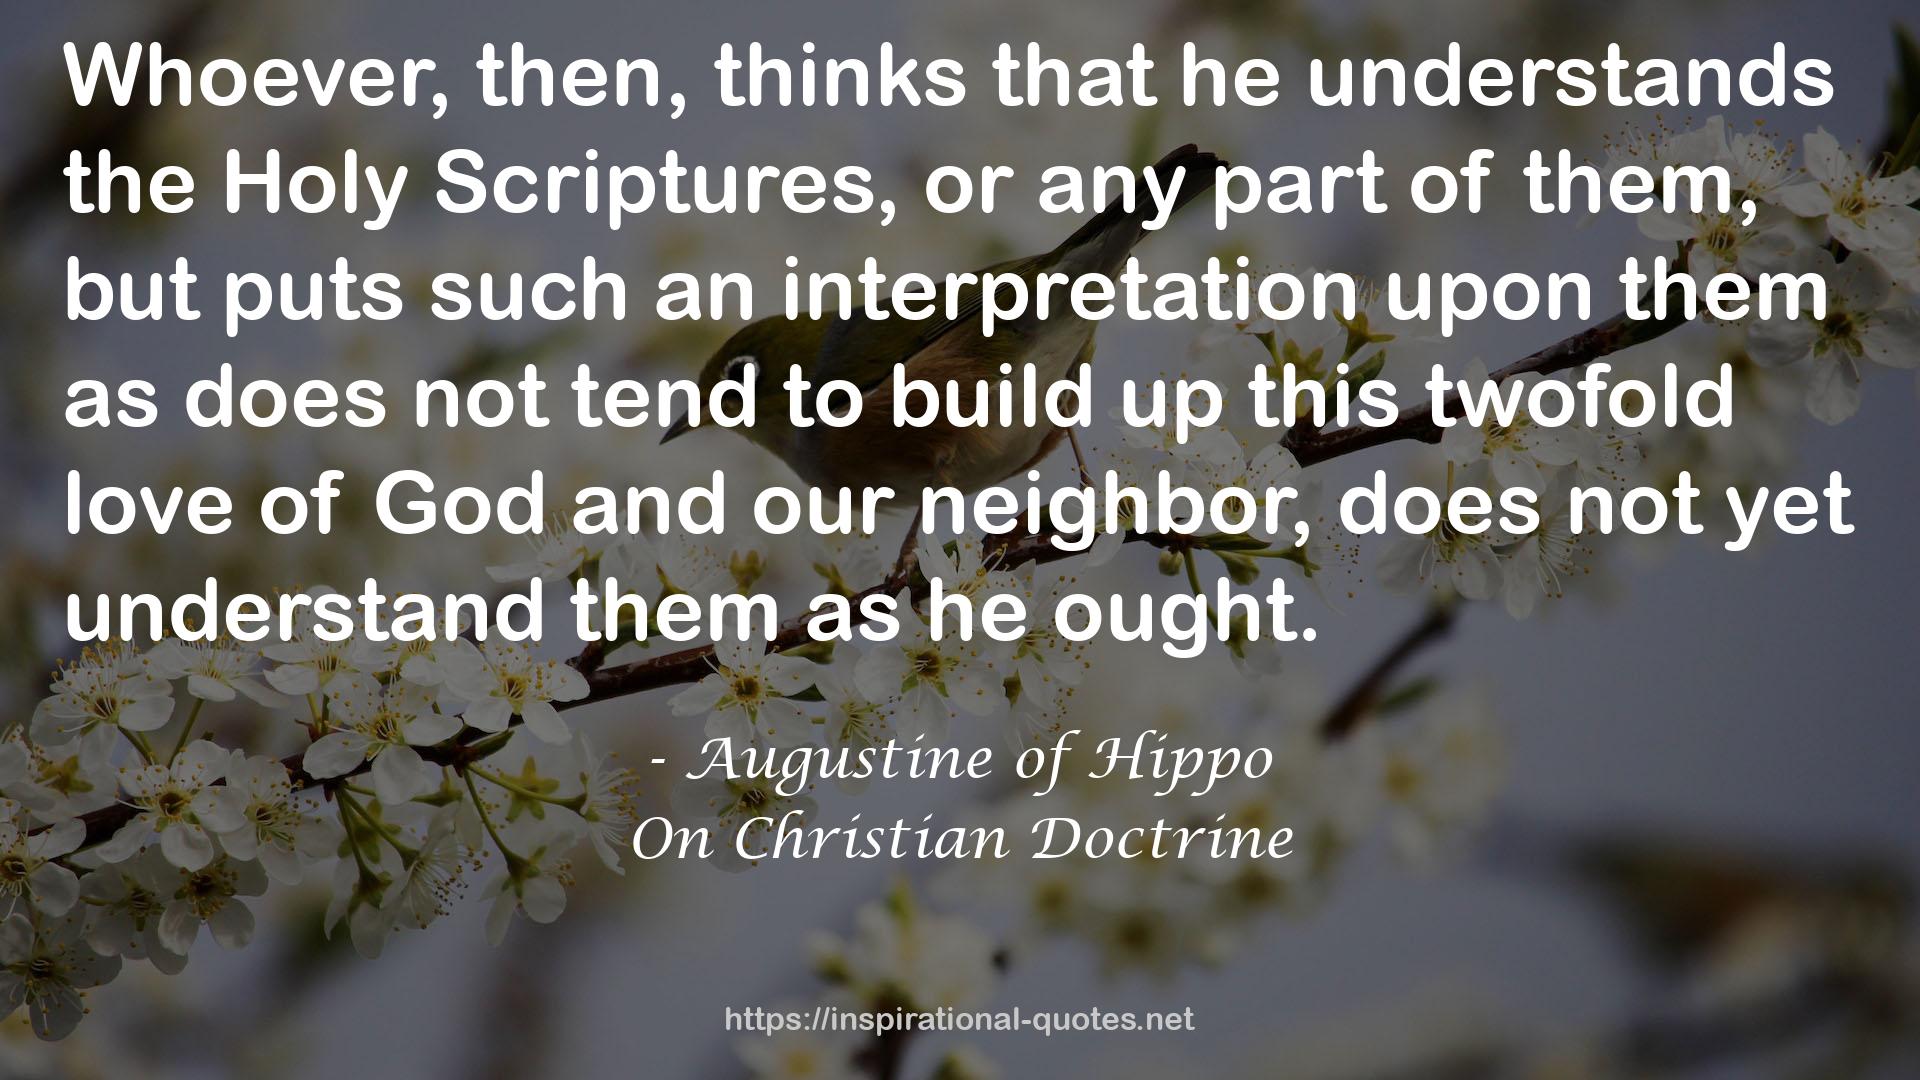 On Christian Doctrine QUOTES